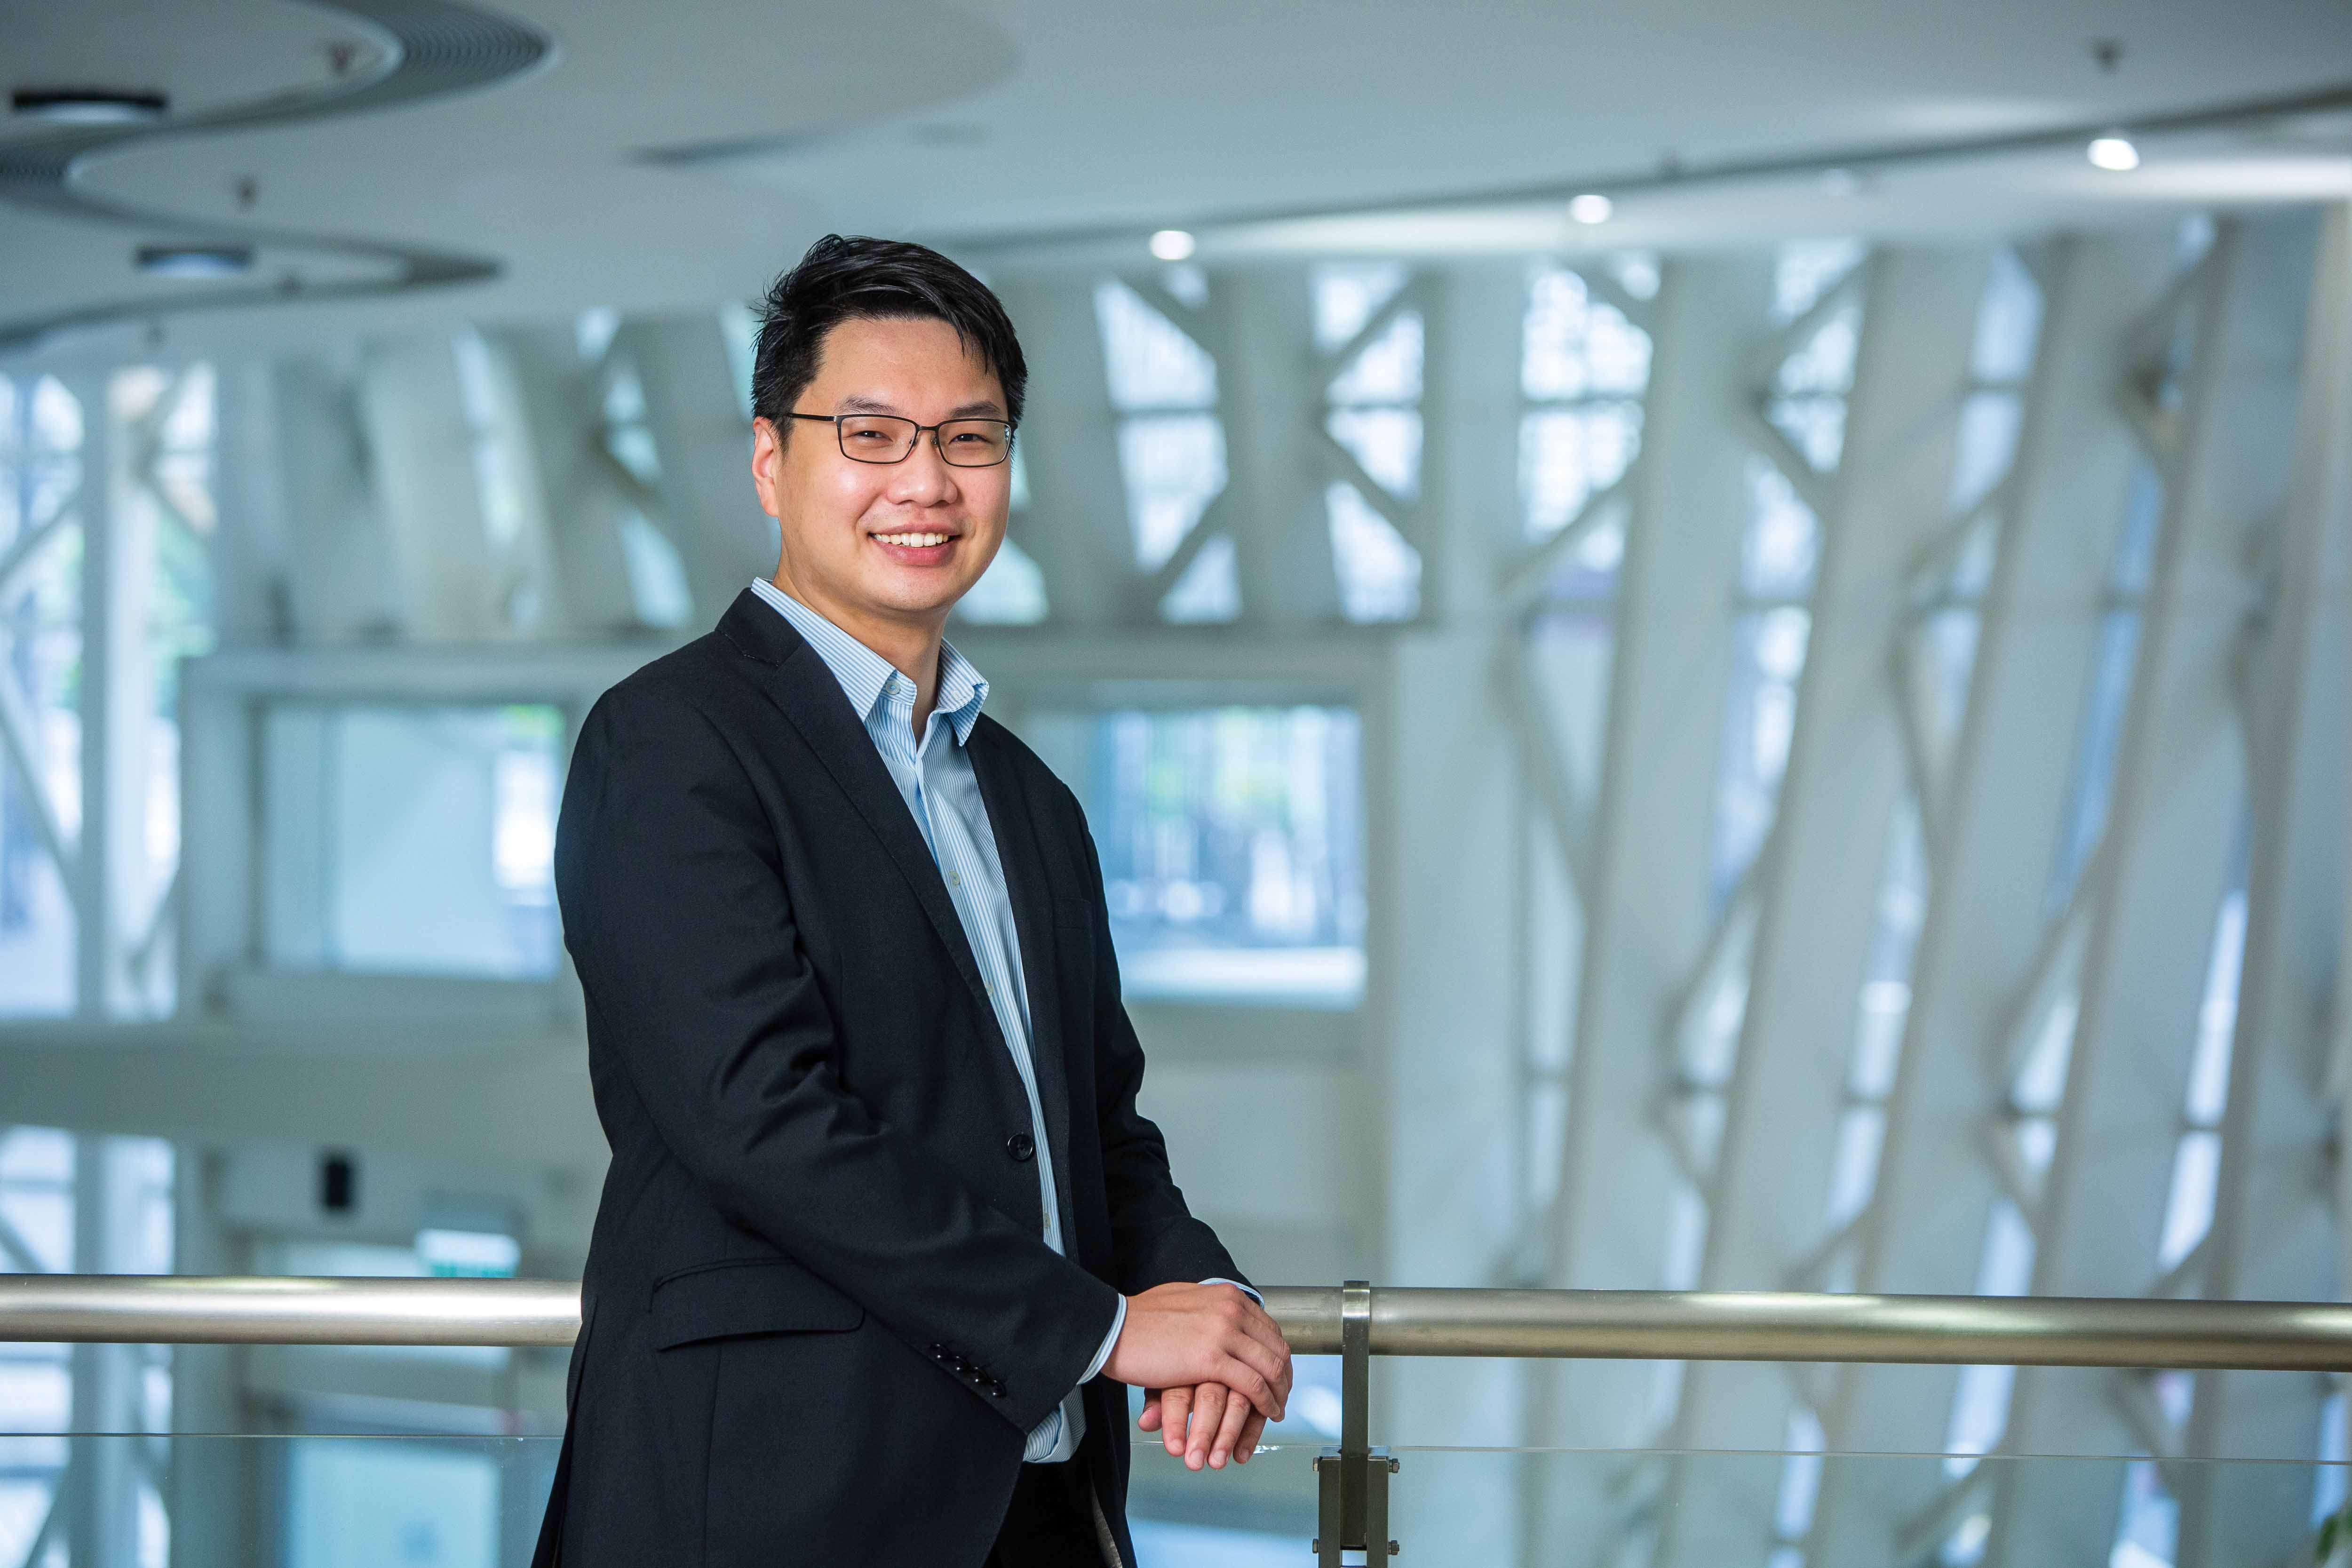 Pun went through the entire education system in Hong Kong. His experience of overcoming language barriers motivated him to enter the research field of English as a medium of instruction (EMI).